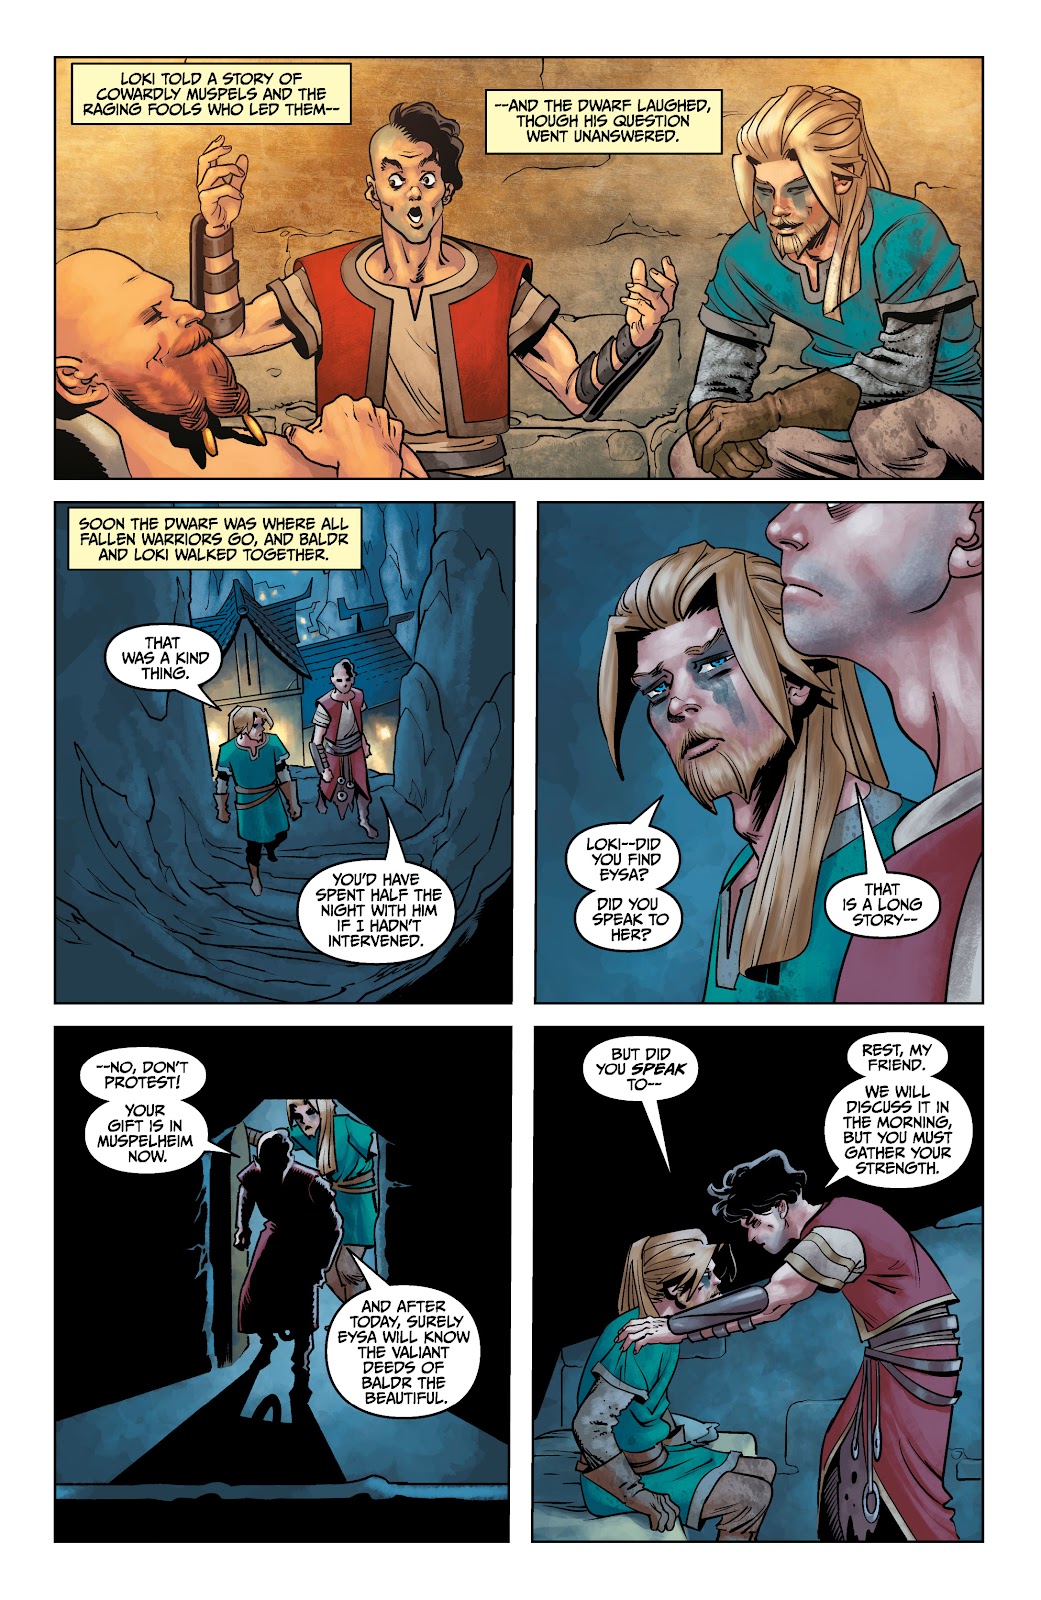 Assassin's Creed Valhalla: Forgotten Myths issue 3 - Page 6